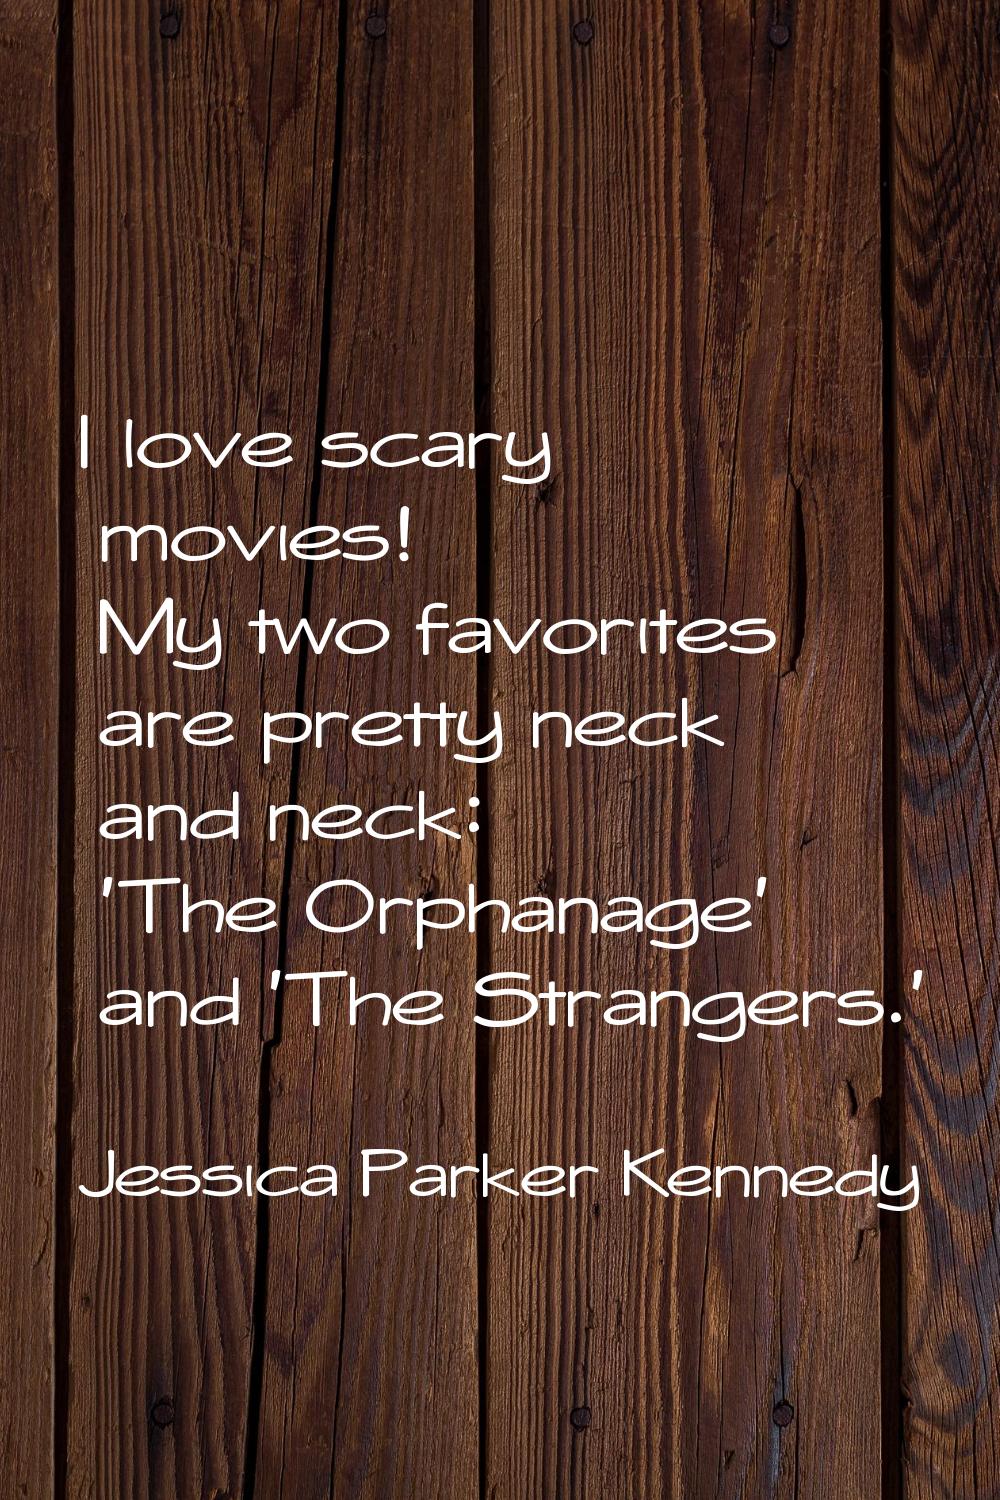 I love scary movies! My two favorites are pretty neck and neck: 'The Orphanage' and 'The Strangers.